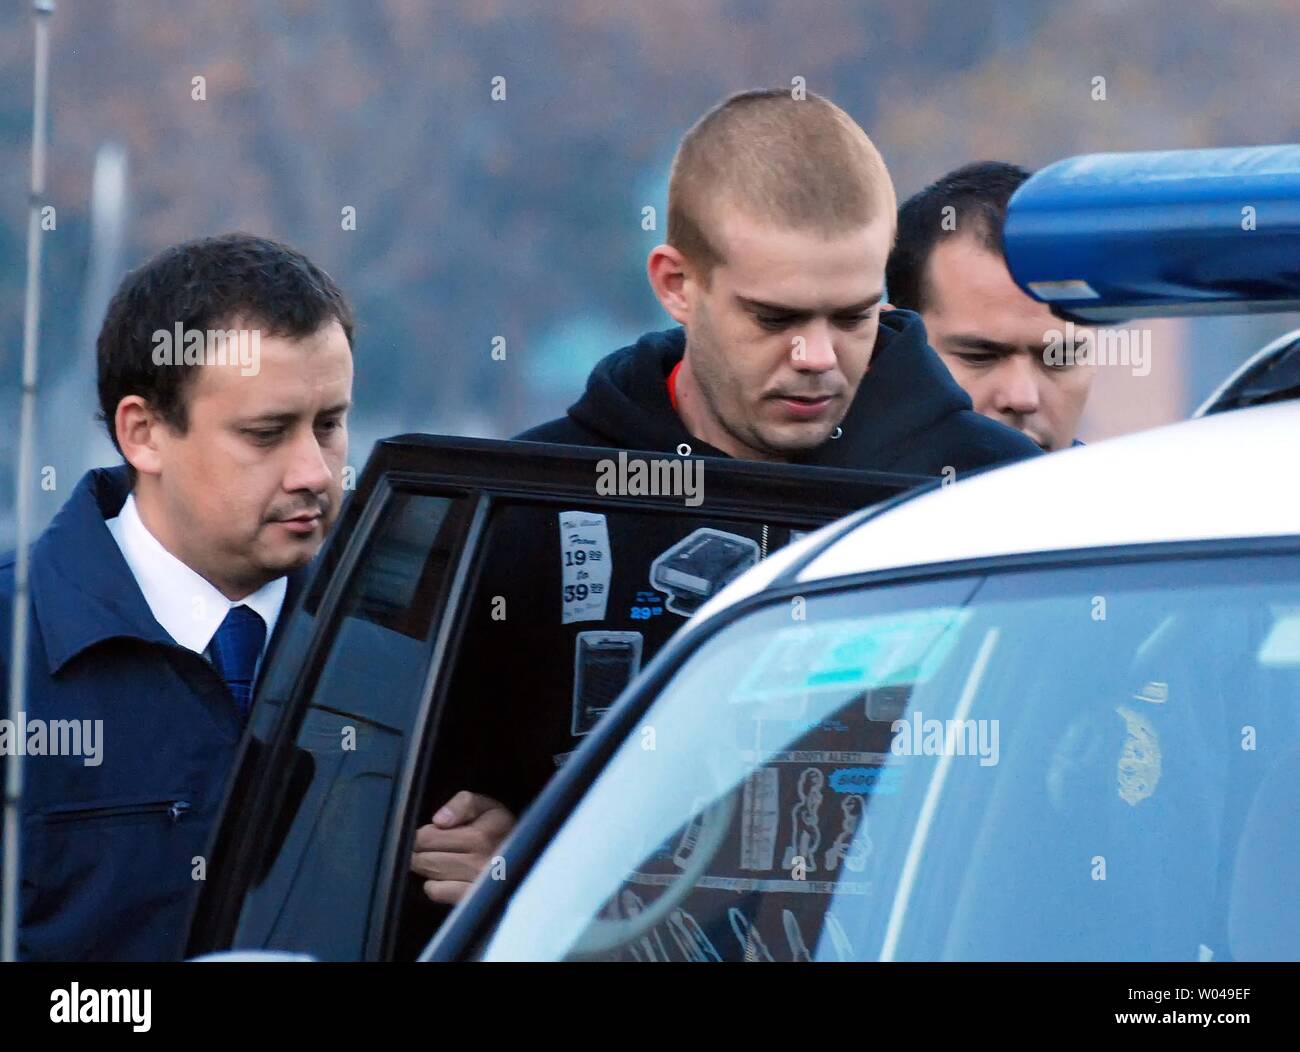 Dutch murder suspect Joran van der Sloot is escorted by Chilean police to an awaiting plane in Santiago, Chile, on June 4, 2010.  He was to be flown to northern Chile and then transferred overland to Peruvian authorities.  He is expected to be charged with the killing of 21-year-old Stephany Flores in a Lima, Peru hotel room. The 23-year-old van der Sloot, a citizen of the Netherlands, remains the prime suspect in the disappearance of Natalie Holloway, and Alabama teenager, on the island of Aruba in 2005.   UPI/Dinko Eichin Stock Photo